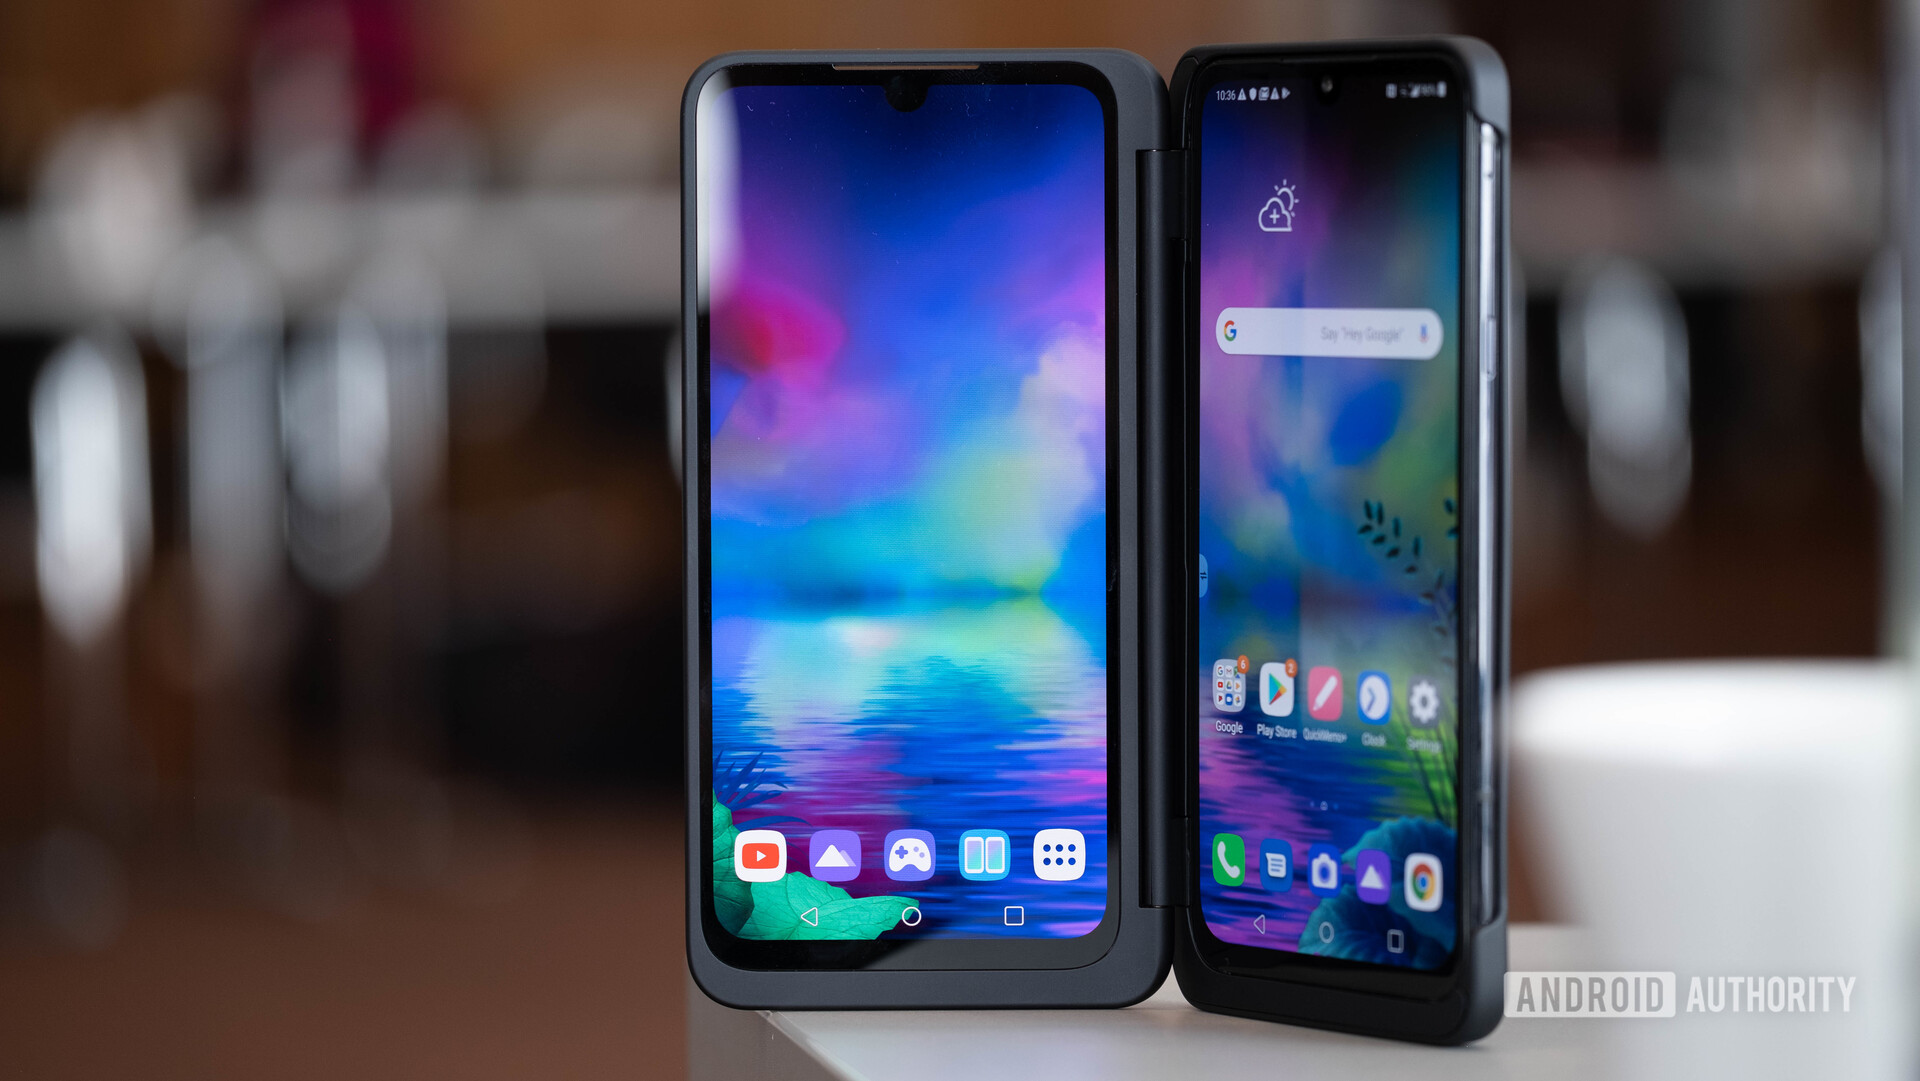 LG G8X ThinQ dual screen landscape on table